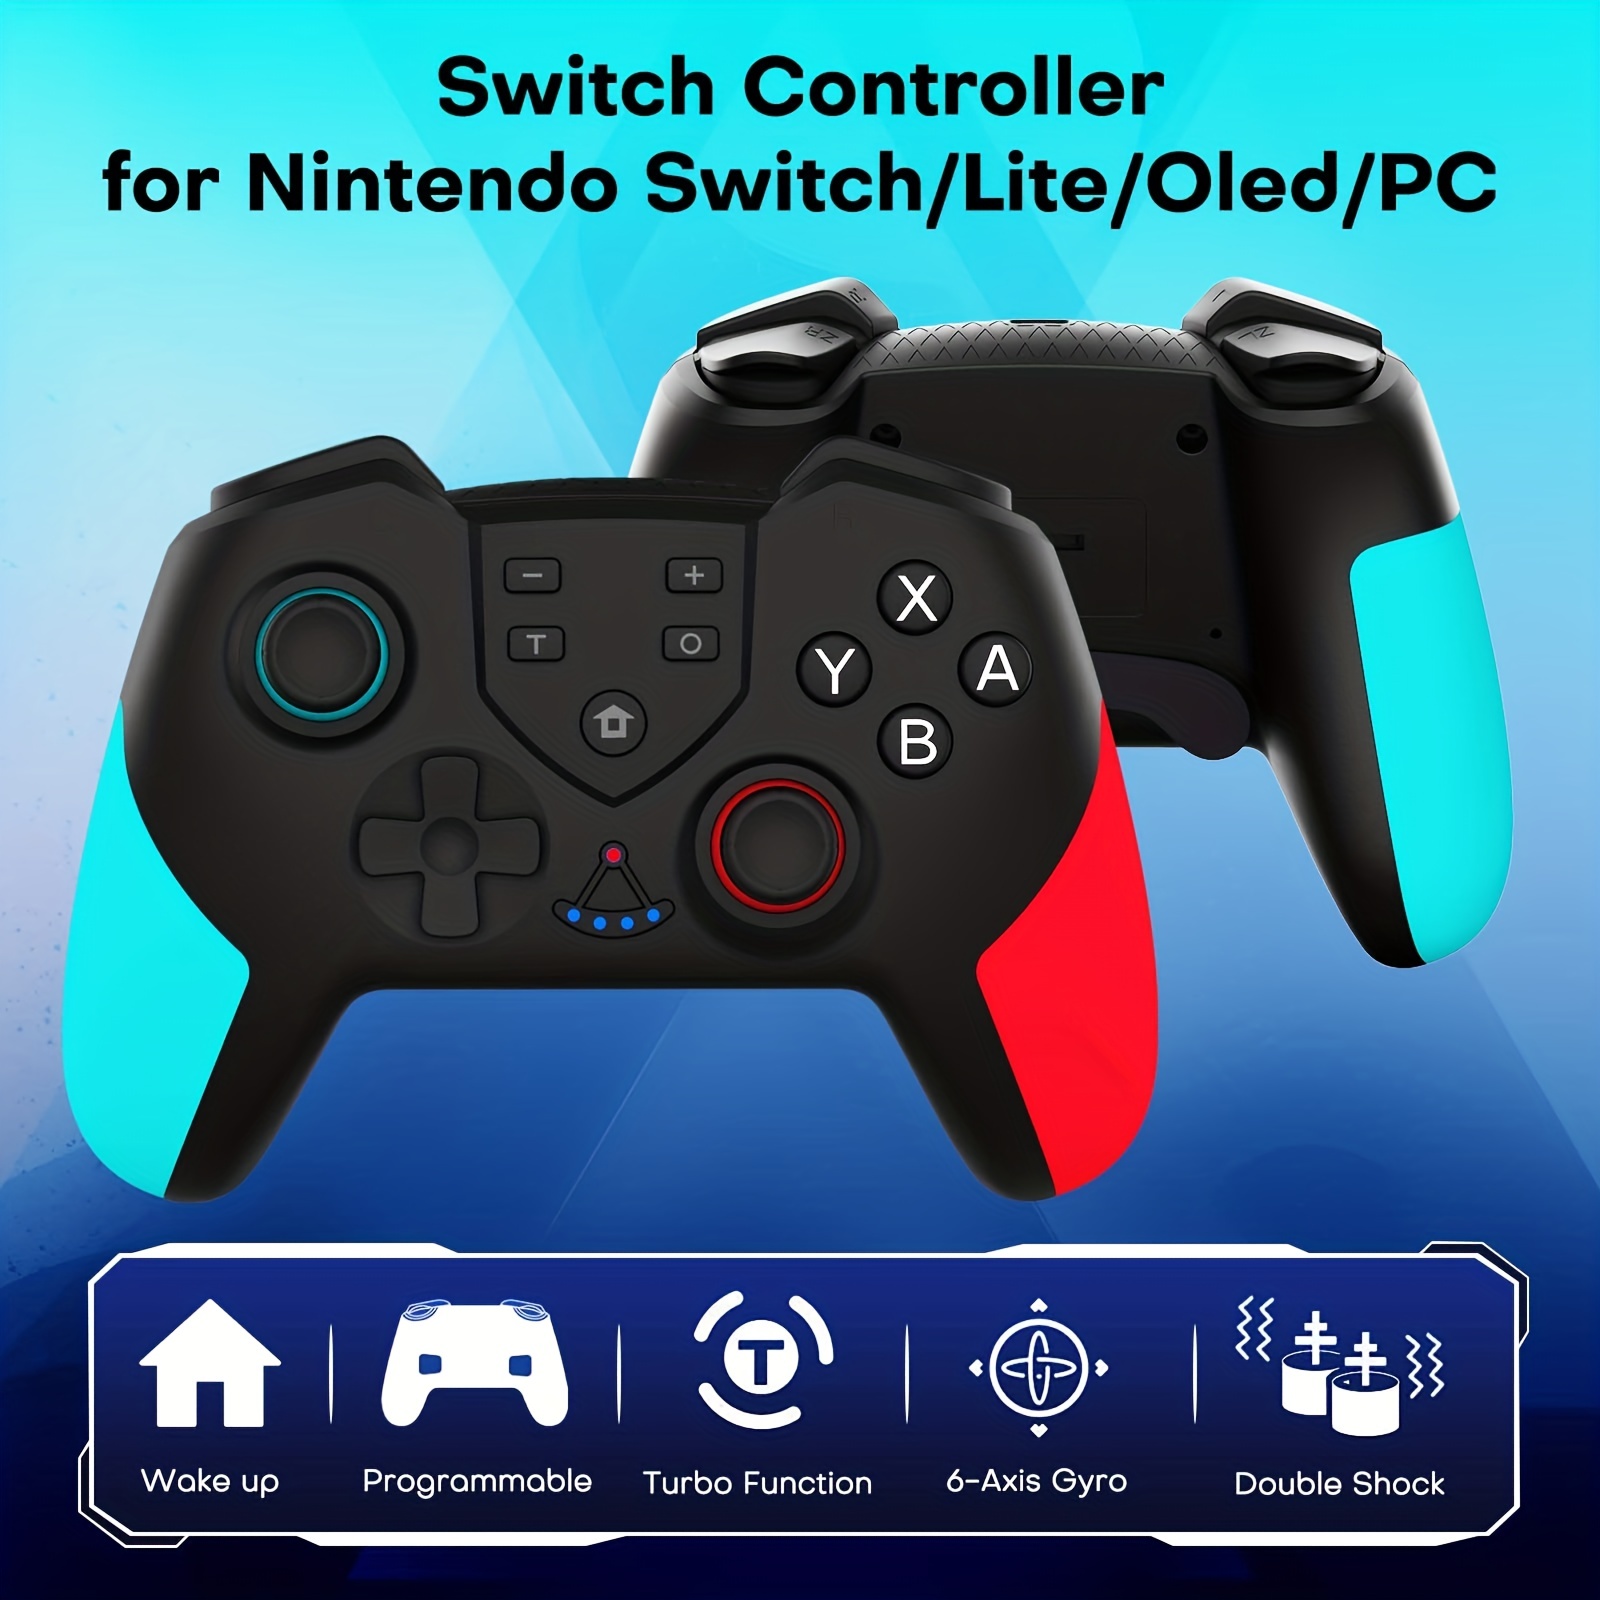 Wireless Gamepad For Nintendo Switch Controller Vibration Turbo Wireless  Video Game Controller For Nintendo Switch Oled/Switch